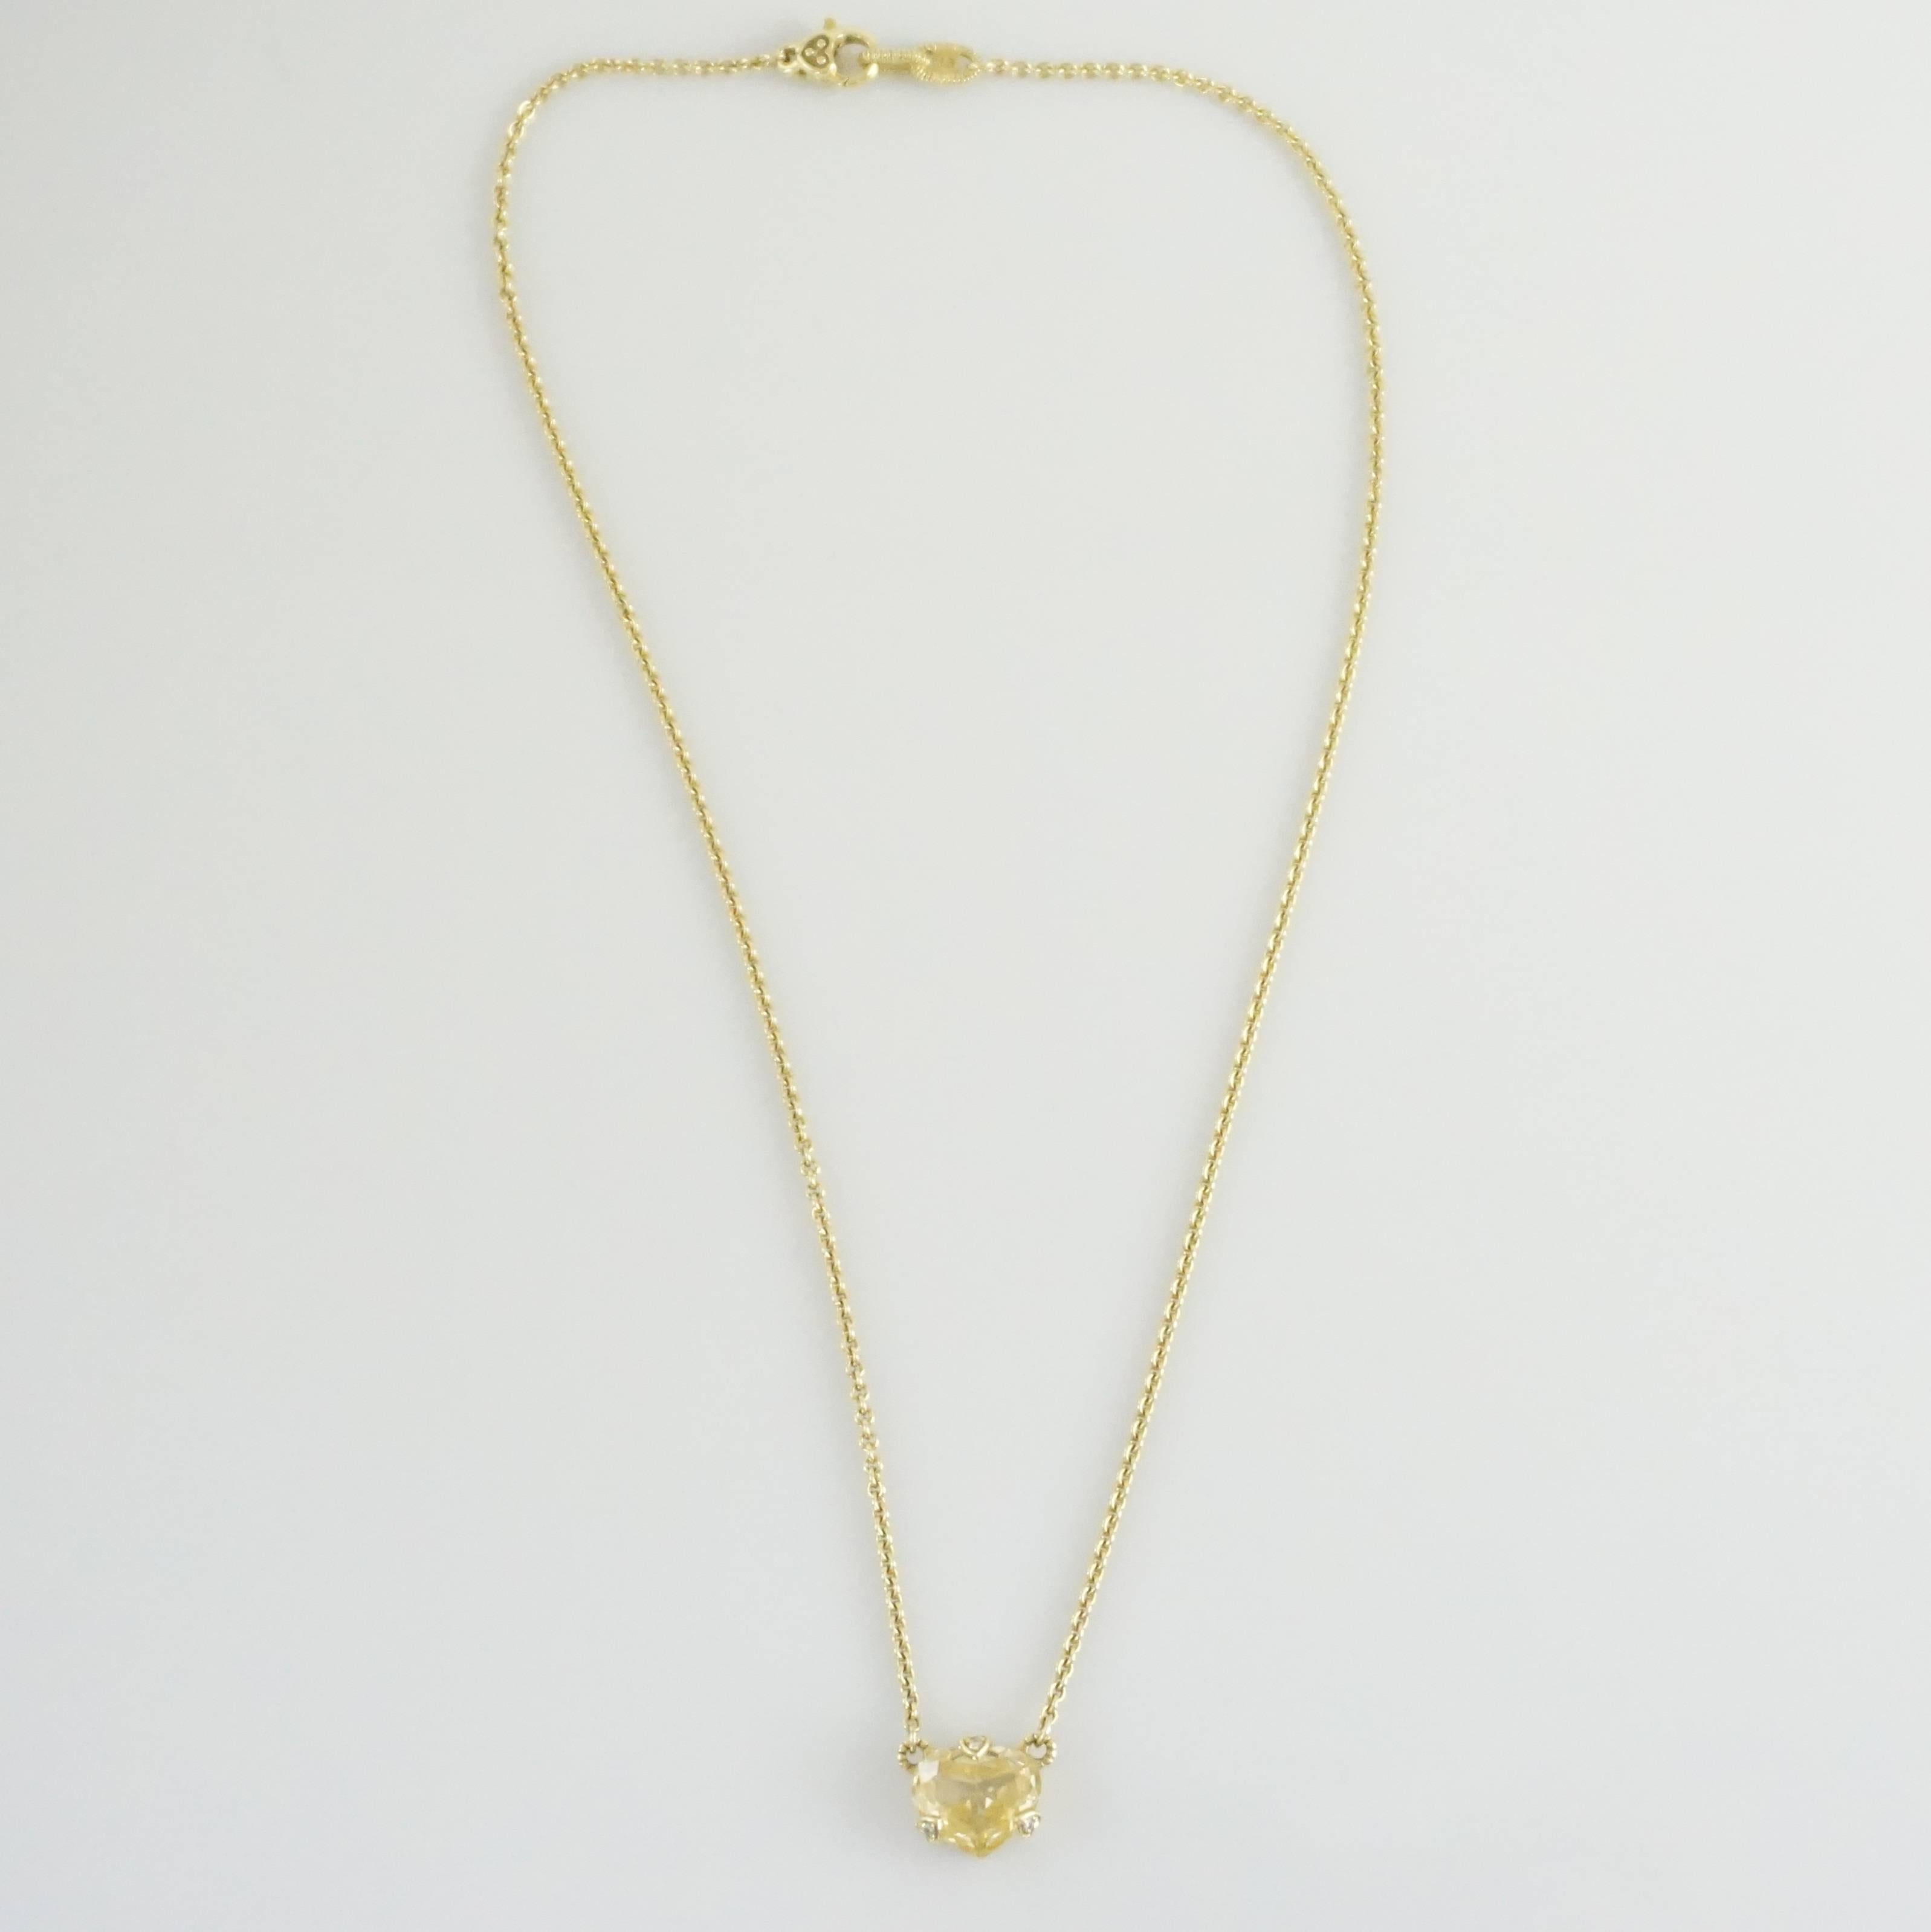 This beautiful Judith Ripka necklace has a chain and detailing of 18K gold, a canary quartz heart, and diamonds inside heart shaped gold. This necklace is in excellent condition.

Measurements
Drop: 8.25 in. 
Heart Width: 0.5 in.